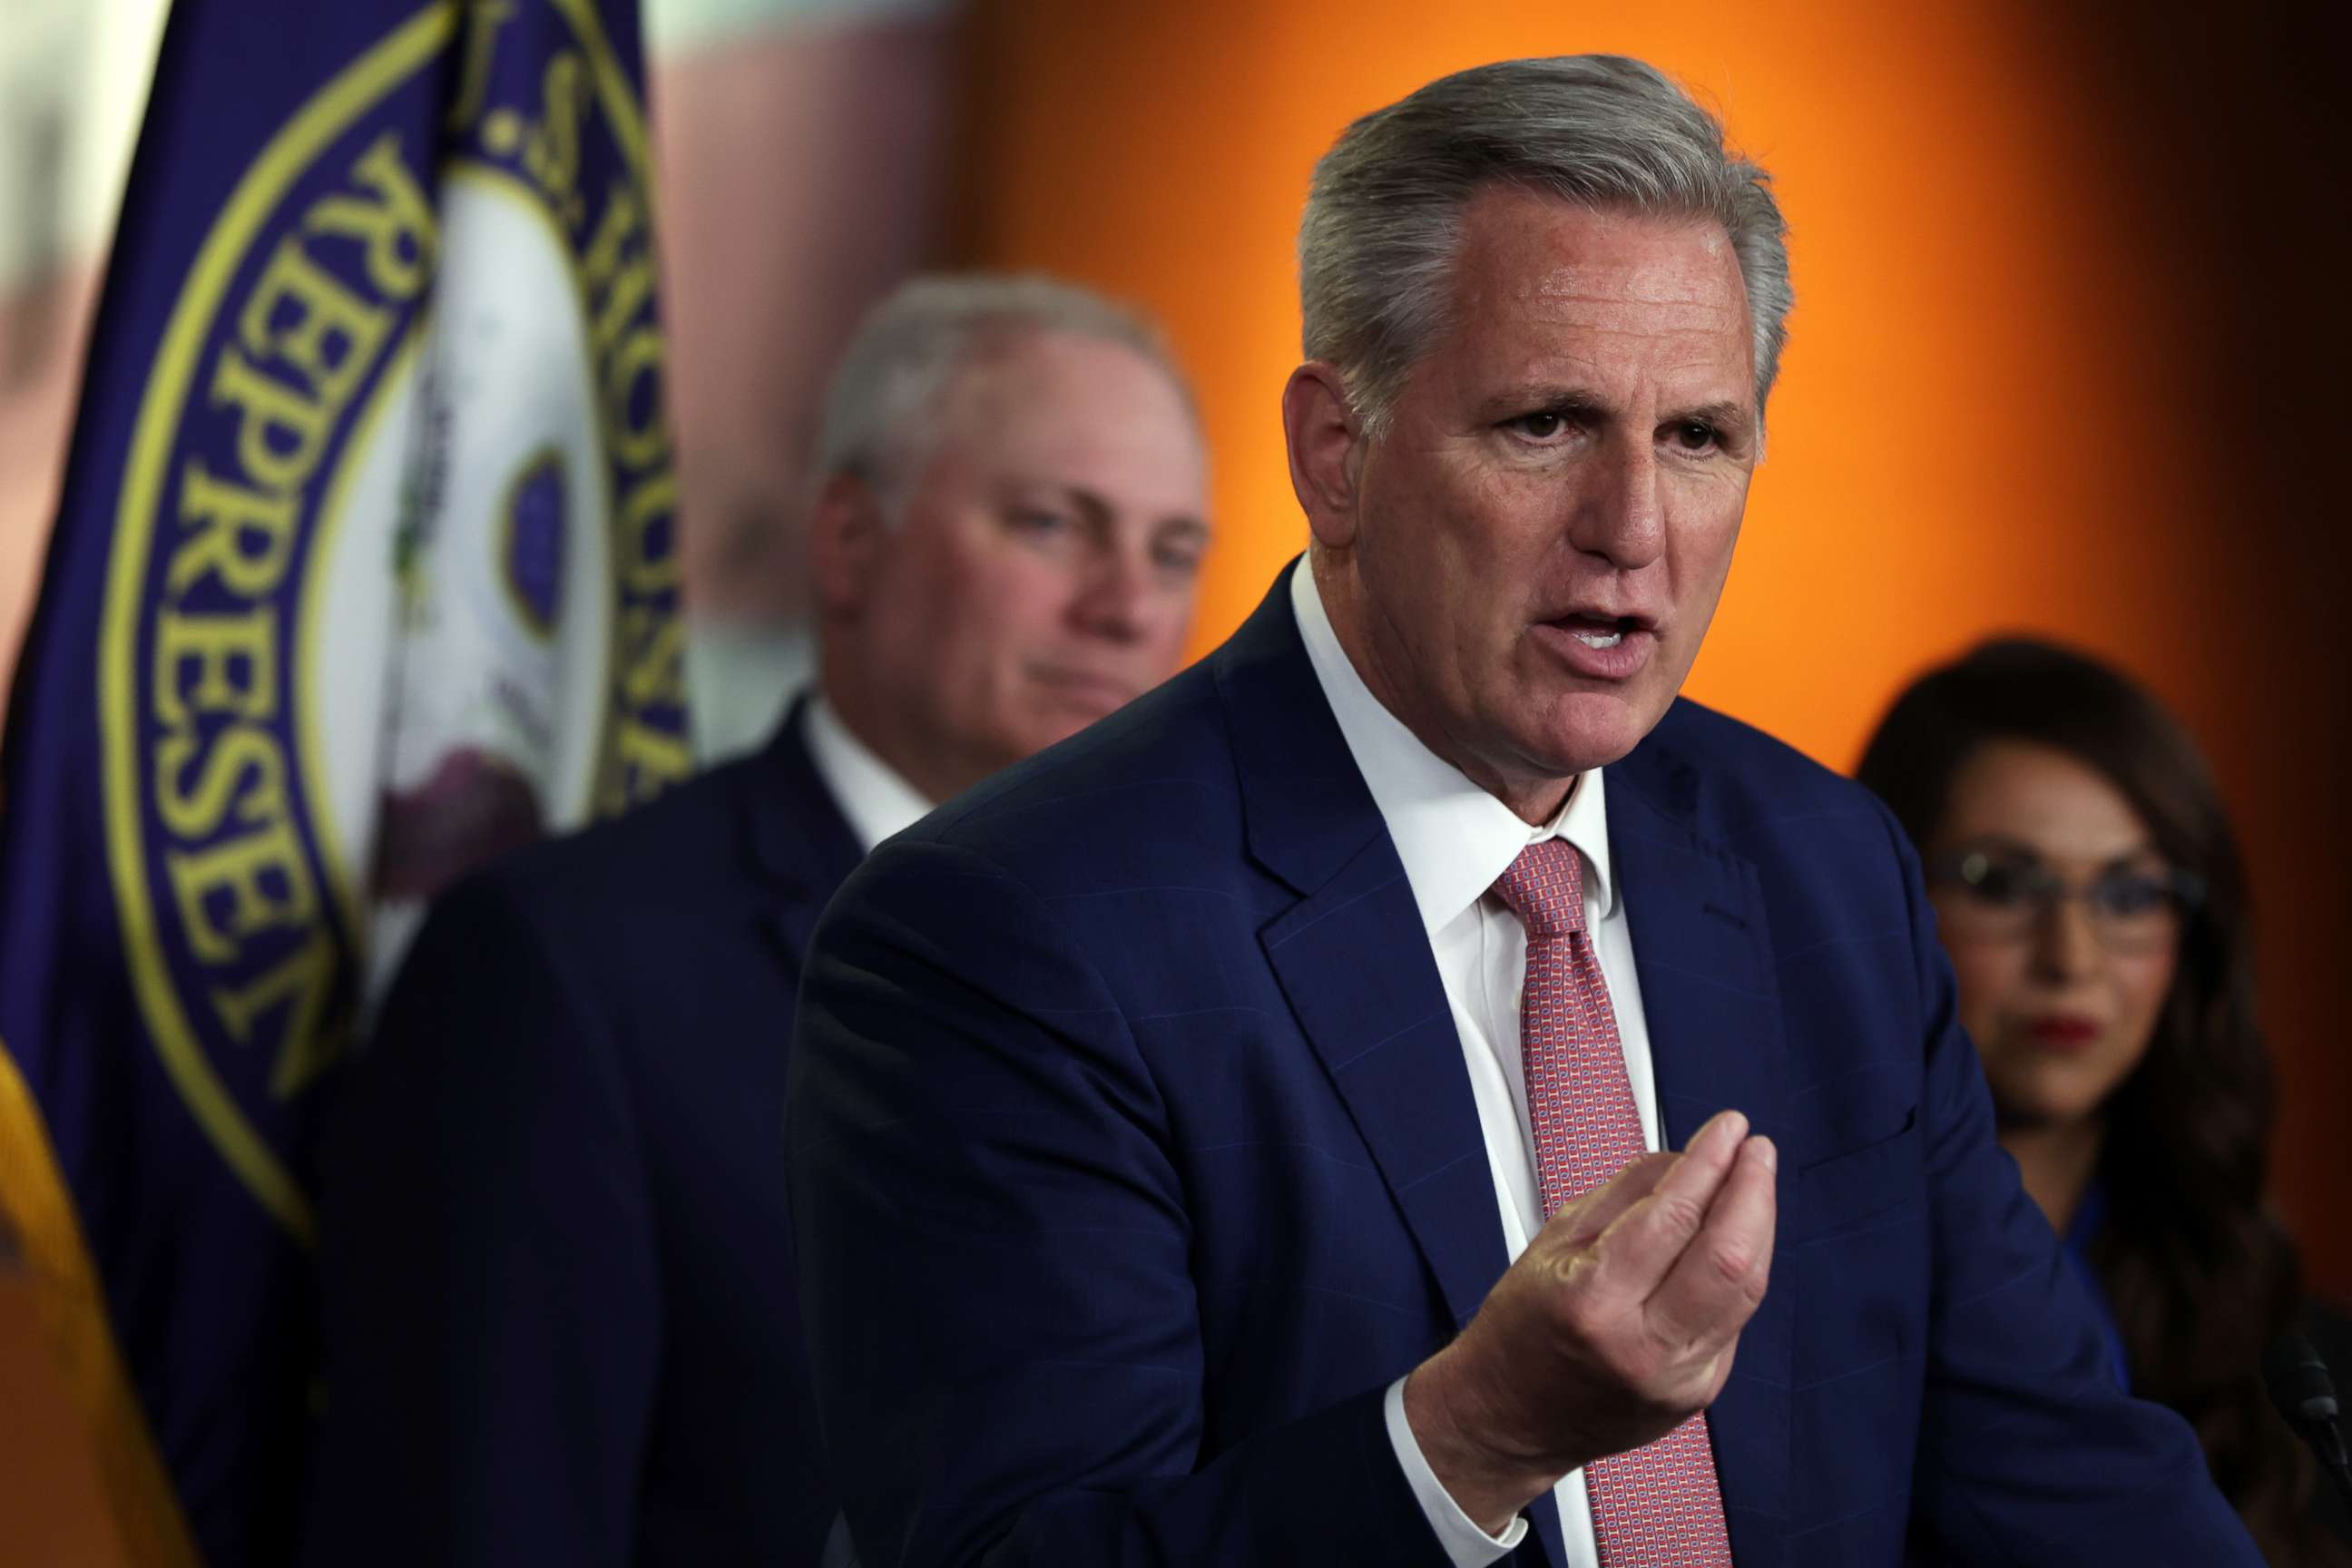 PHOTO: U.S. House Minority Leader Rep. Kevin McCarthy, R-Calif., speaks during a news conference at the U.S. Capitol, May 11, 2022 in Washington, D.C.